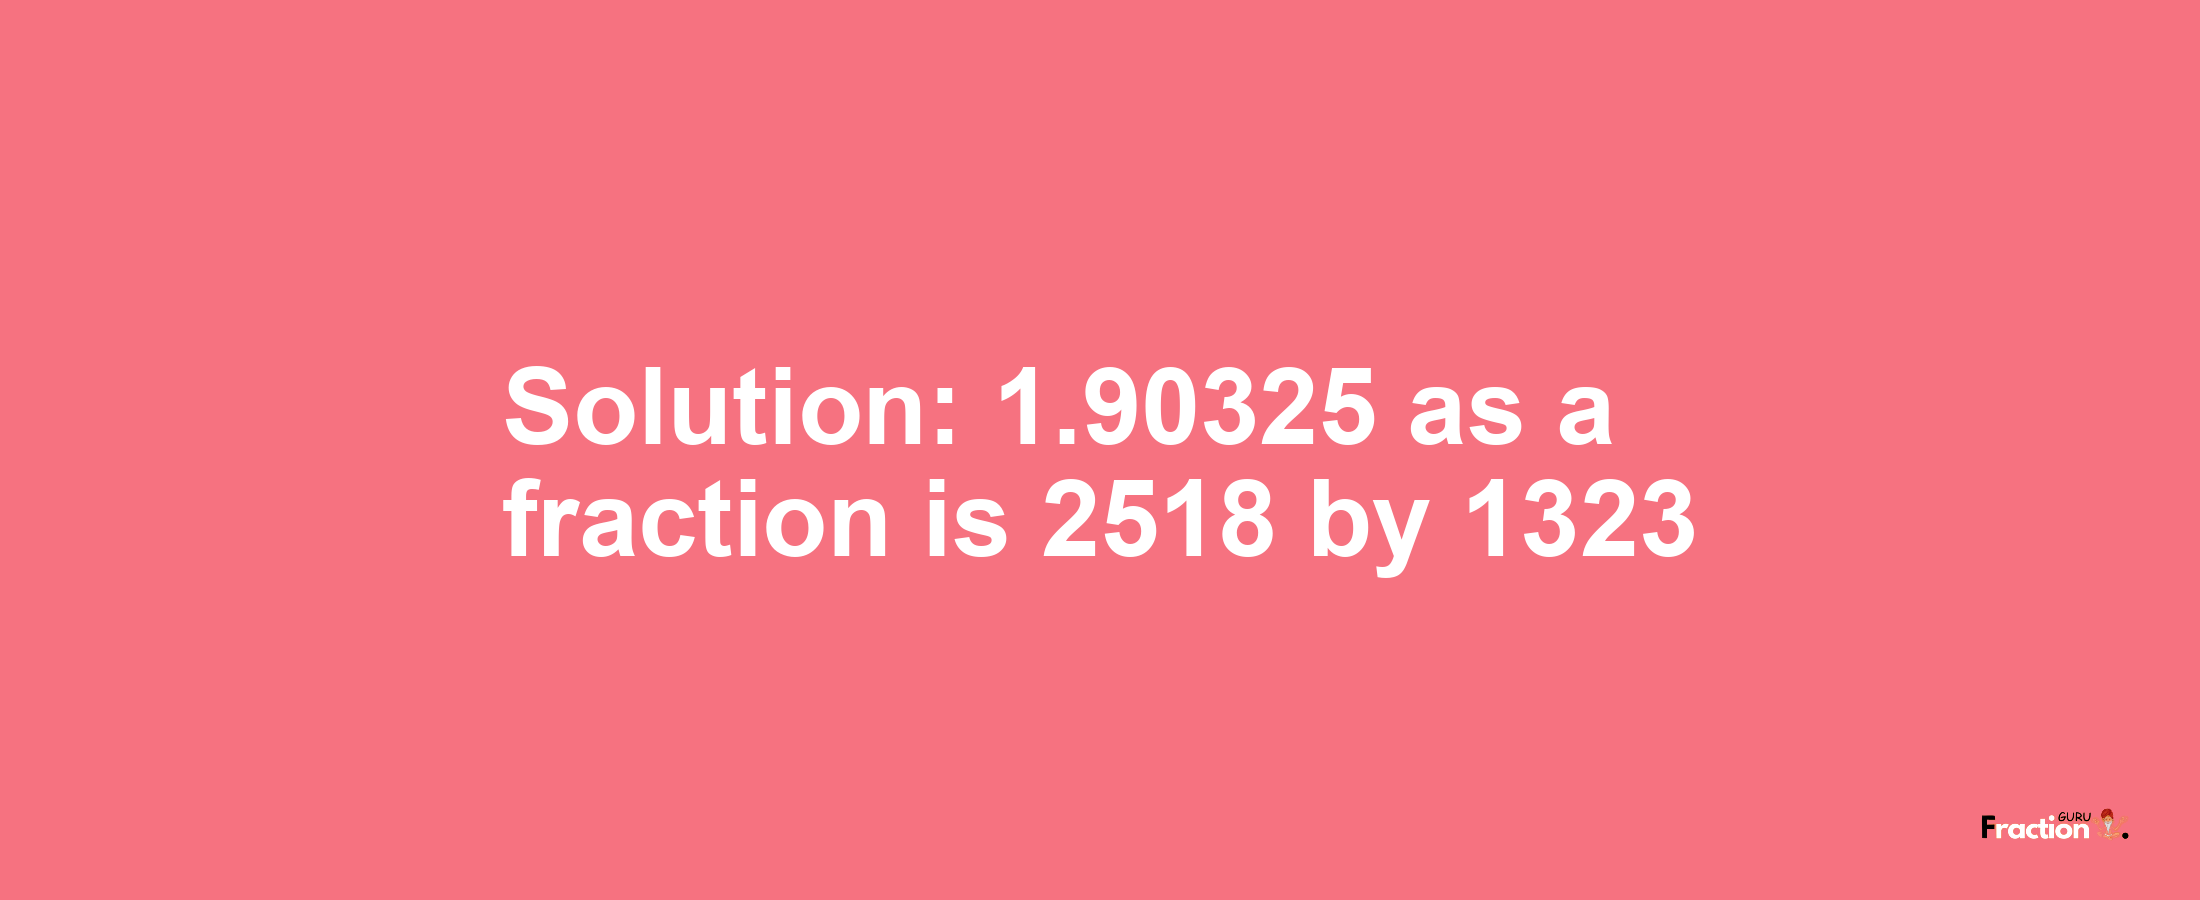 Solution:1.90325 as a fraction is 2518/1323